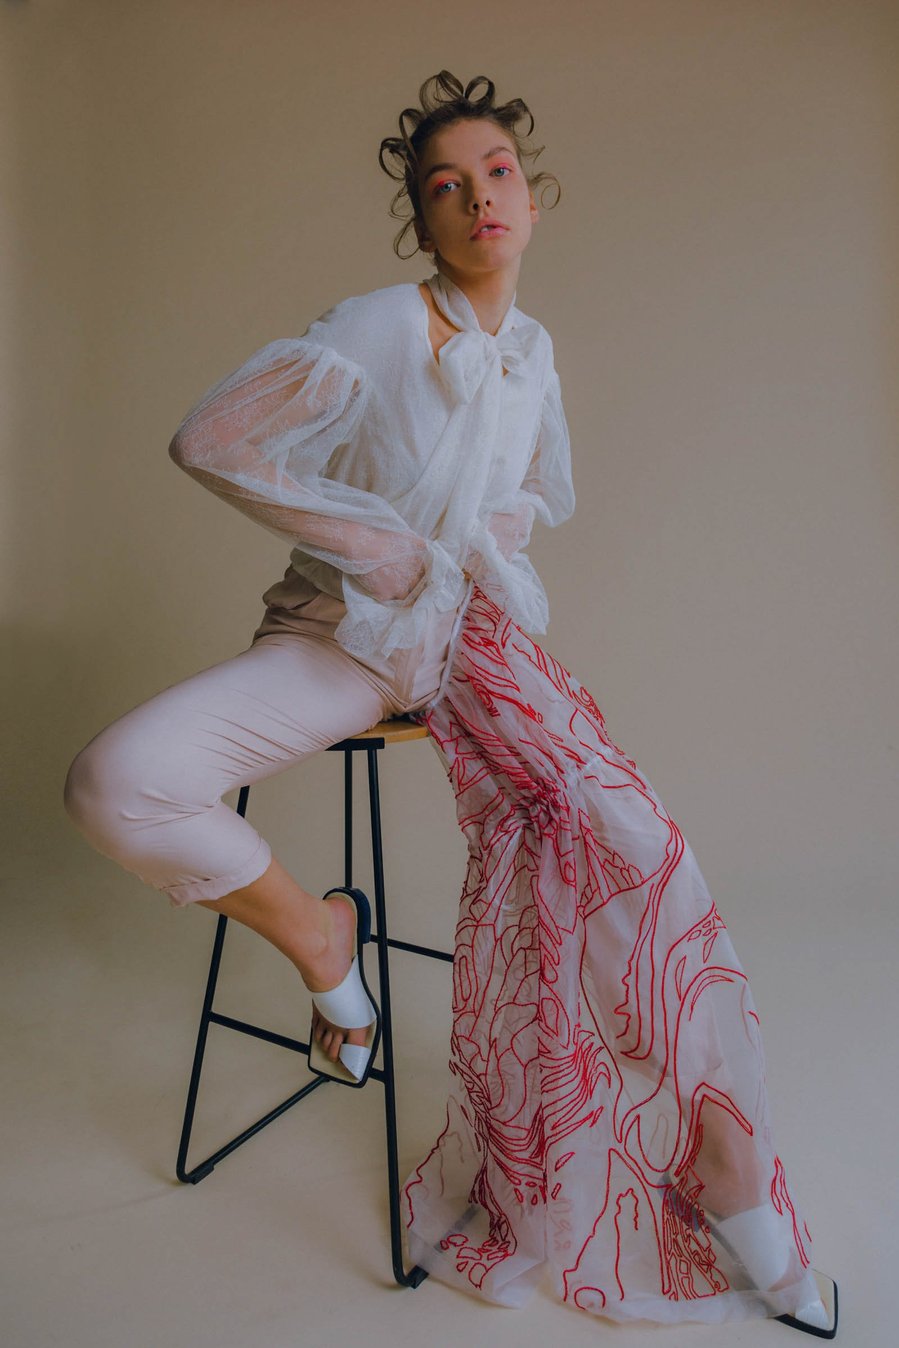 Move with me a fashion editorial for F Word Magazine
Hair stylist Alexyi Reneece, Make Up Artist Ayesha Brown, Stylist Carole Mcphillips, Assistant Sara Bonifaci

Isobel wears shirt and trousers NAYA REA; one legged trouser ICEYNNE; shoes 4CCCEES

